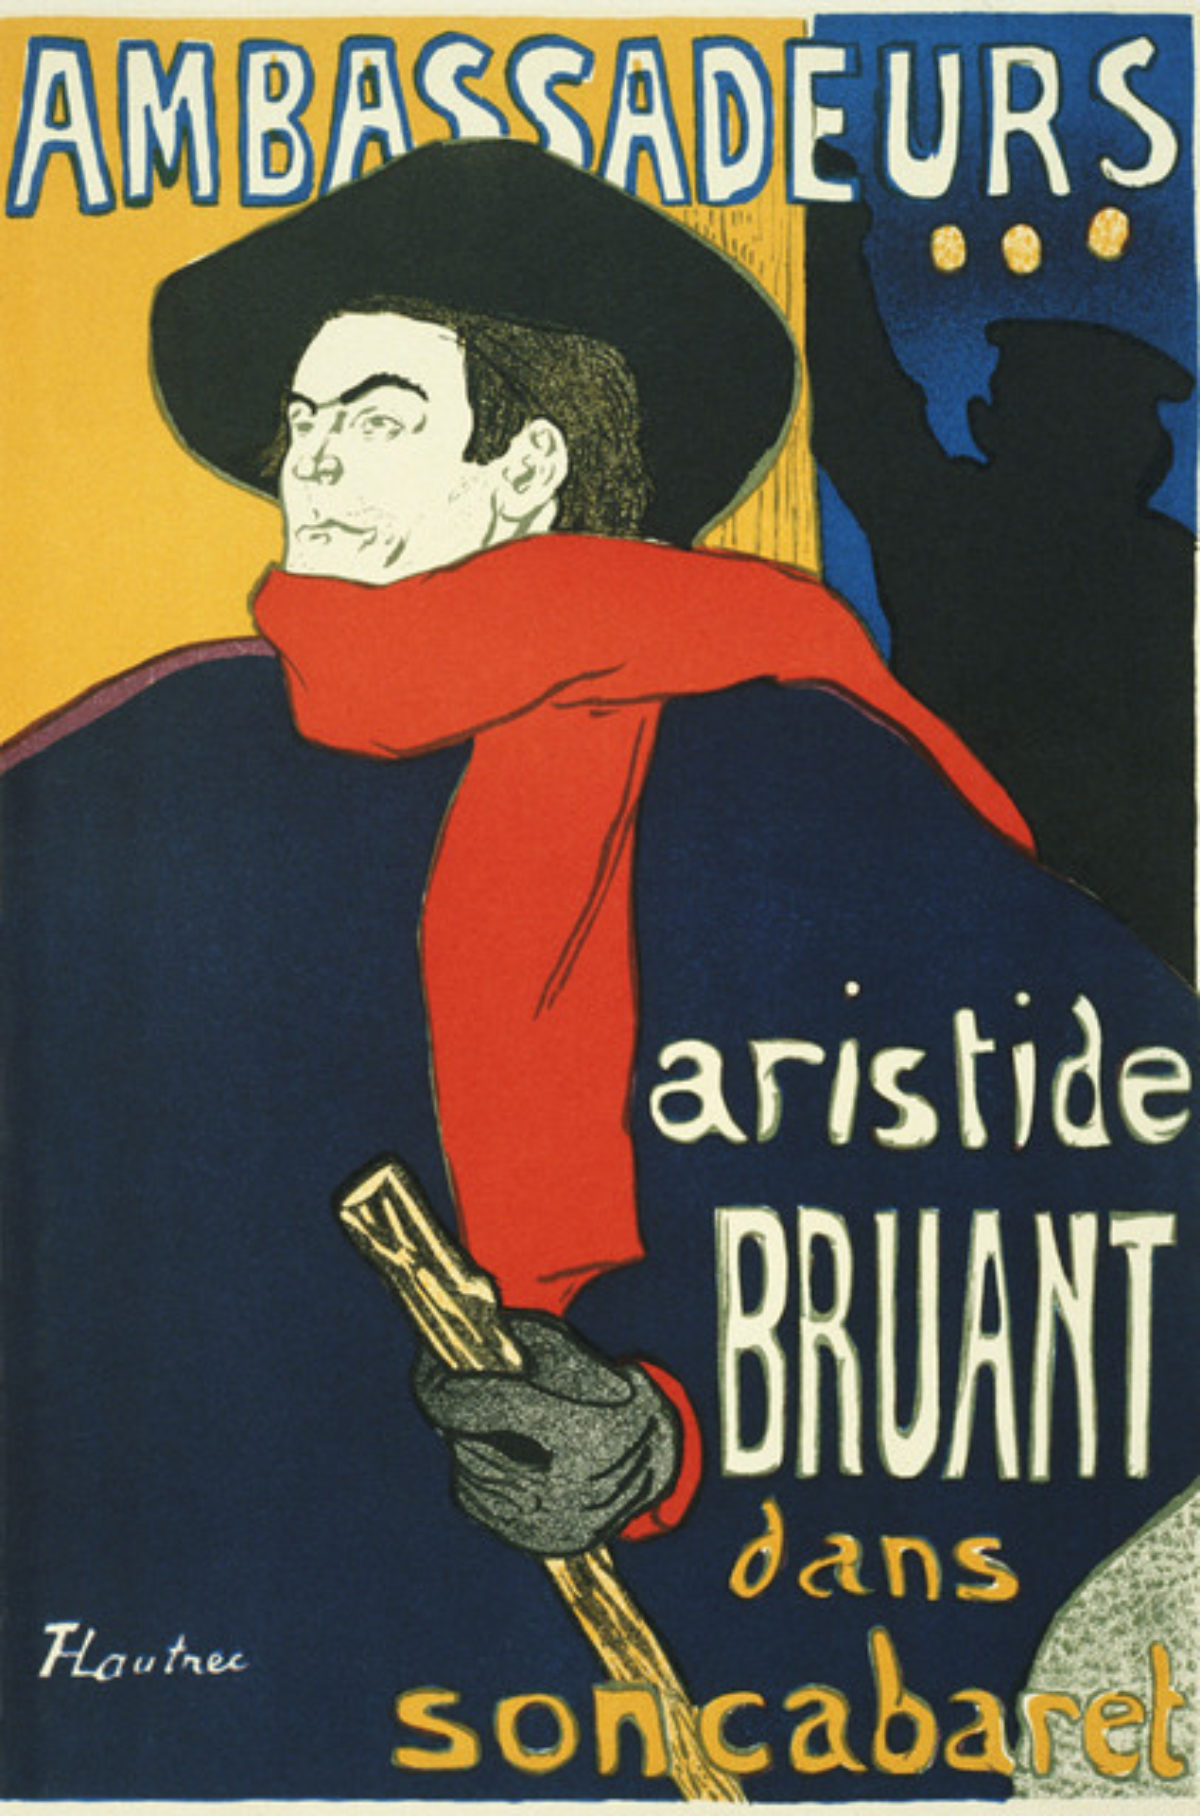 A poster of a person with a black beret and coat holding onto a stick as a shadowy figure is behind him.